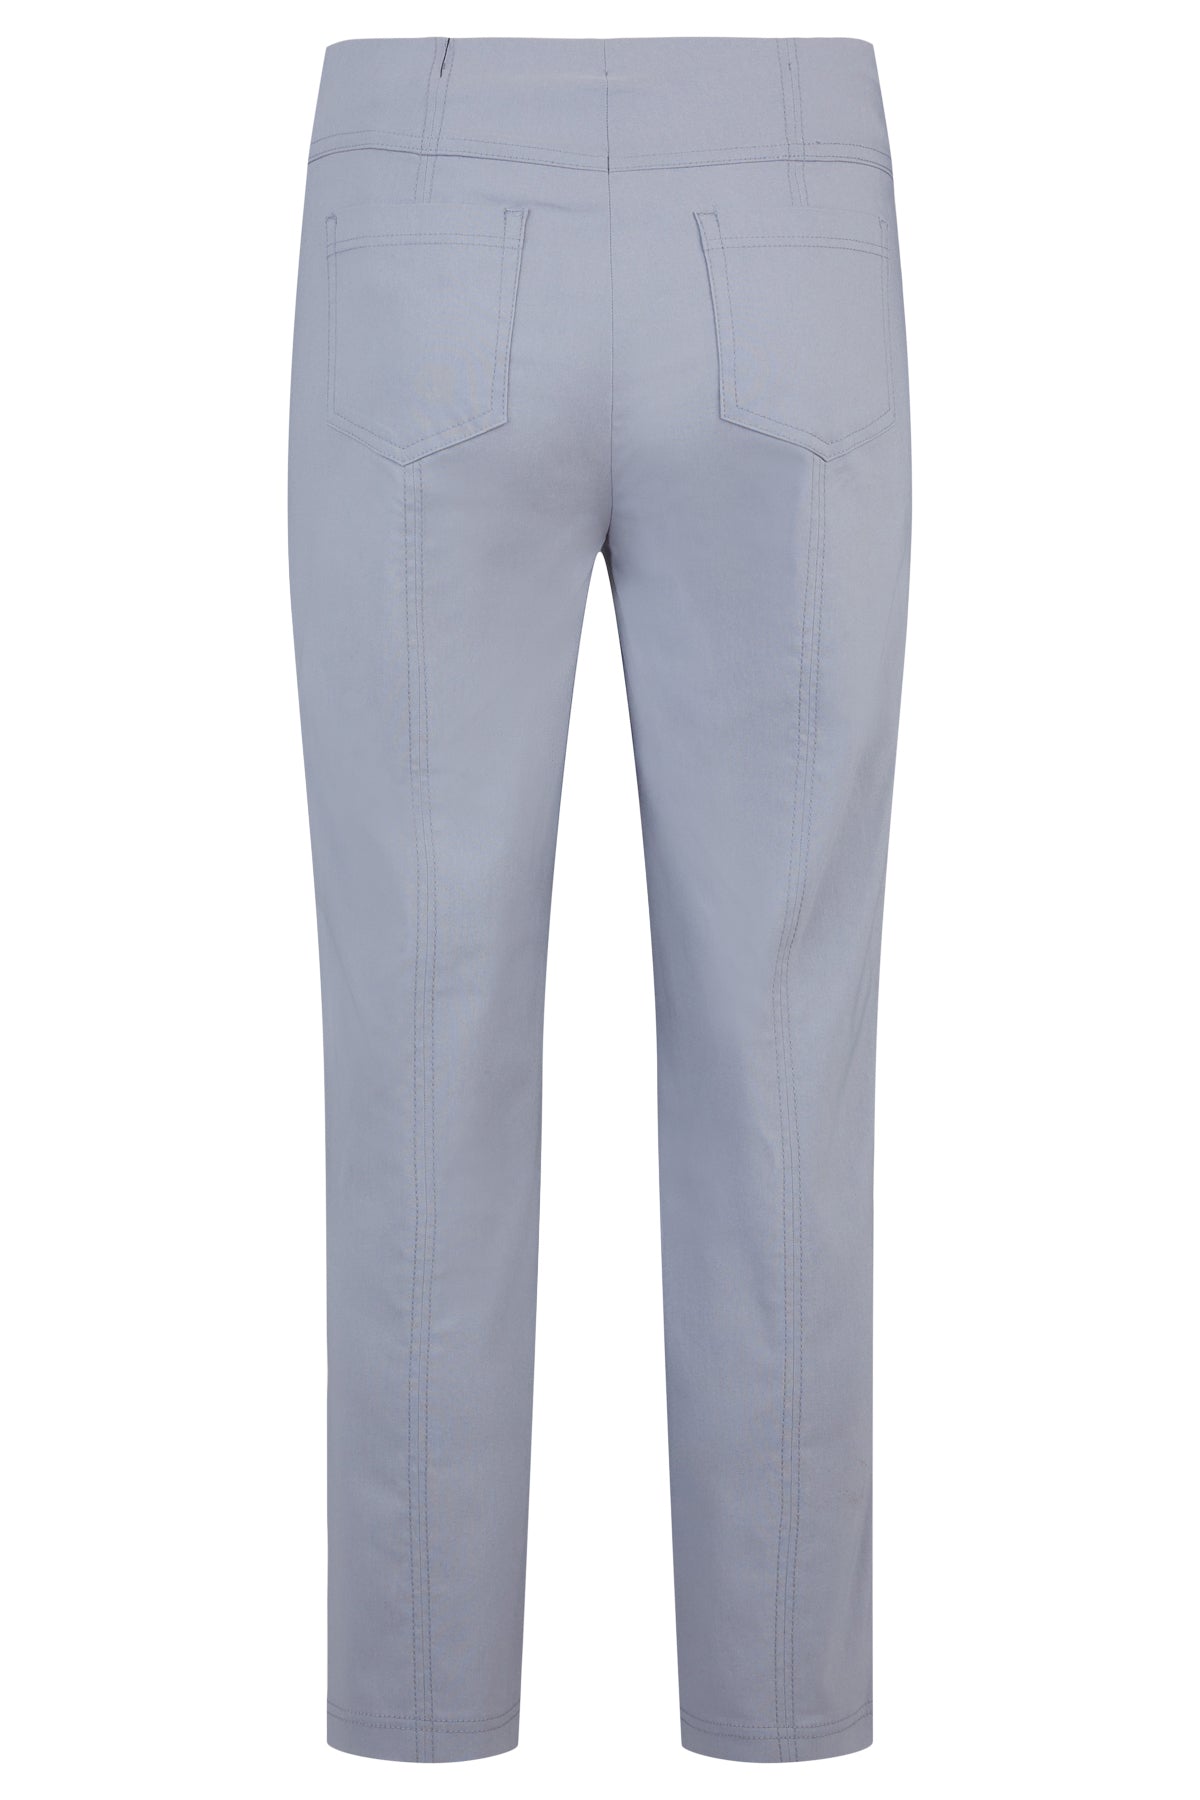 Robell Trousers P BELLA